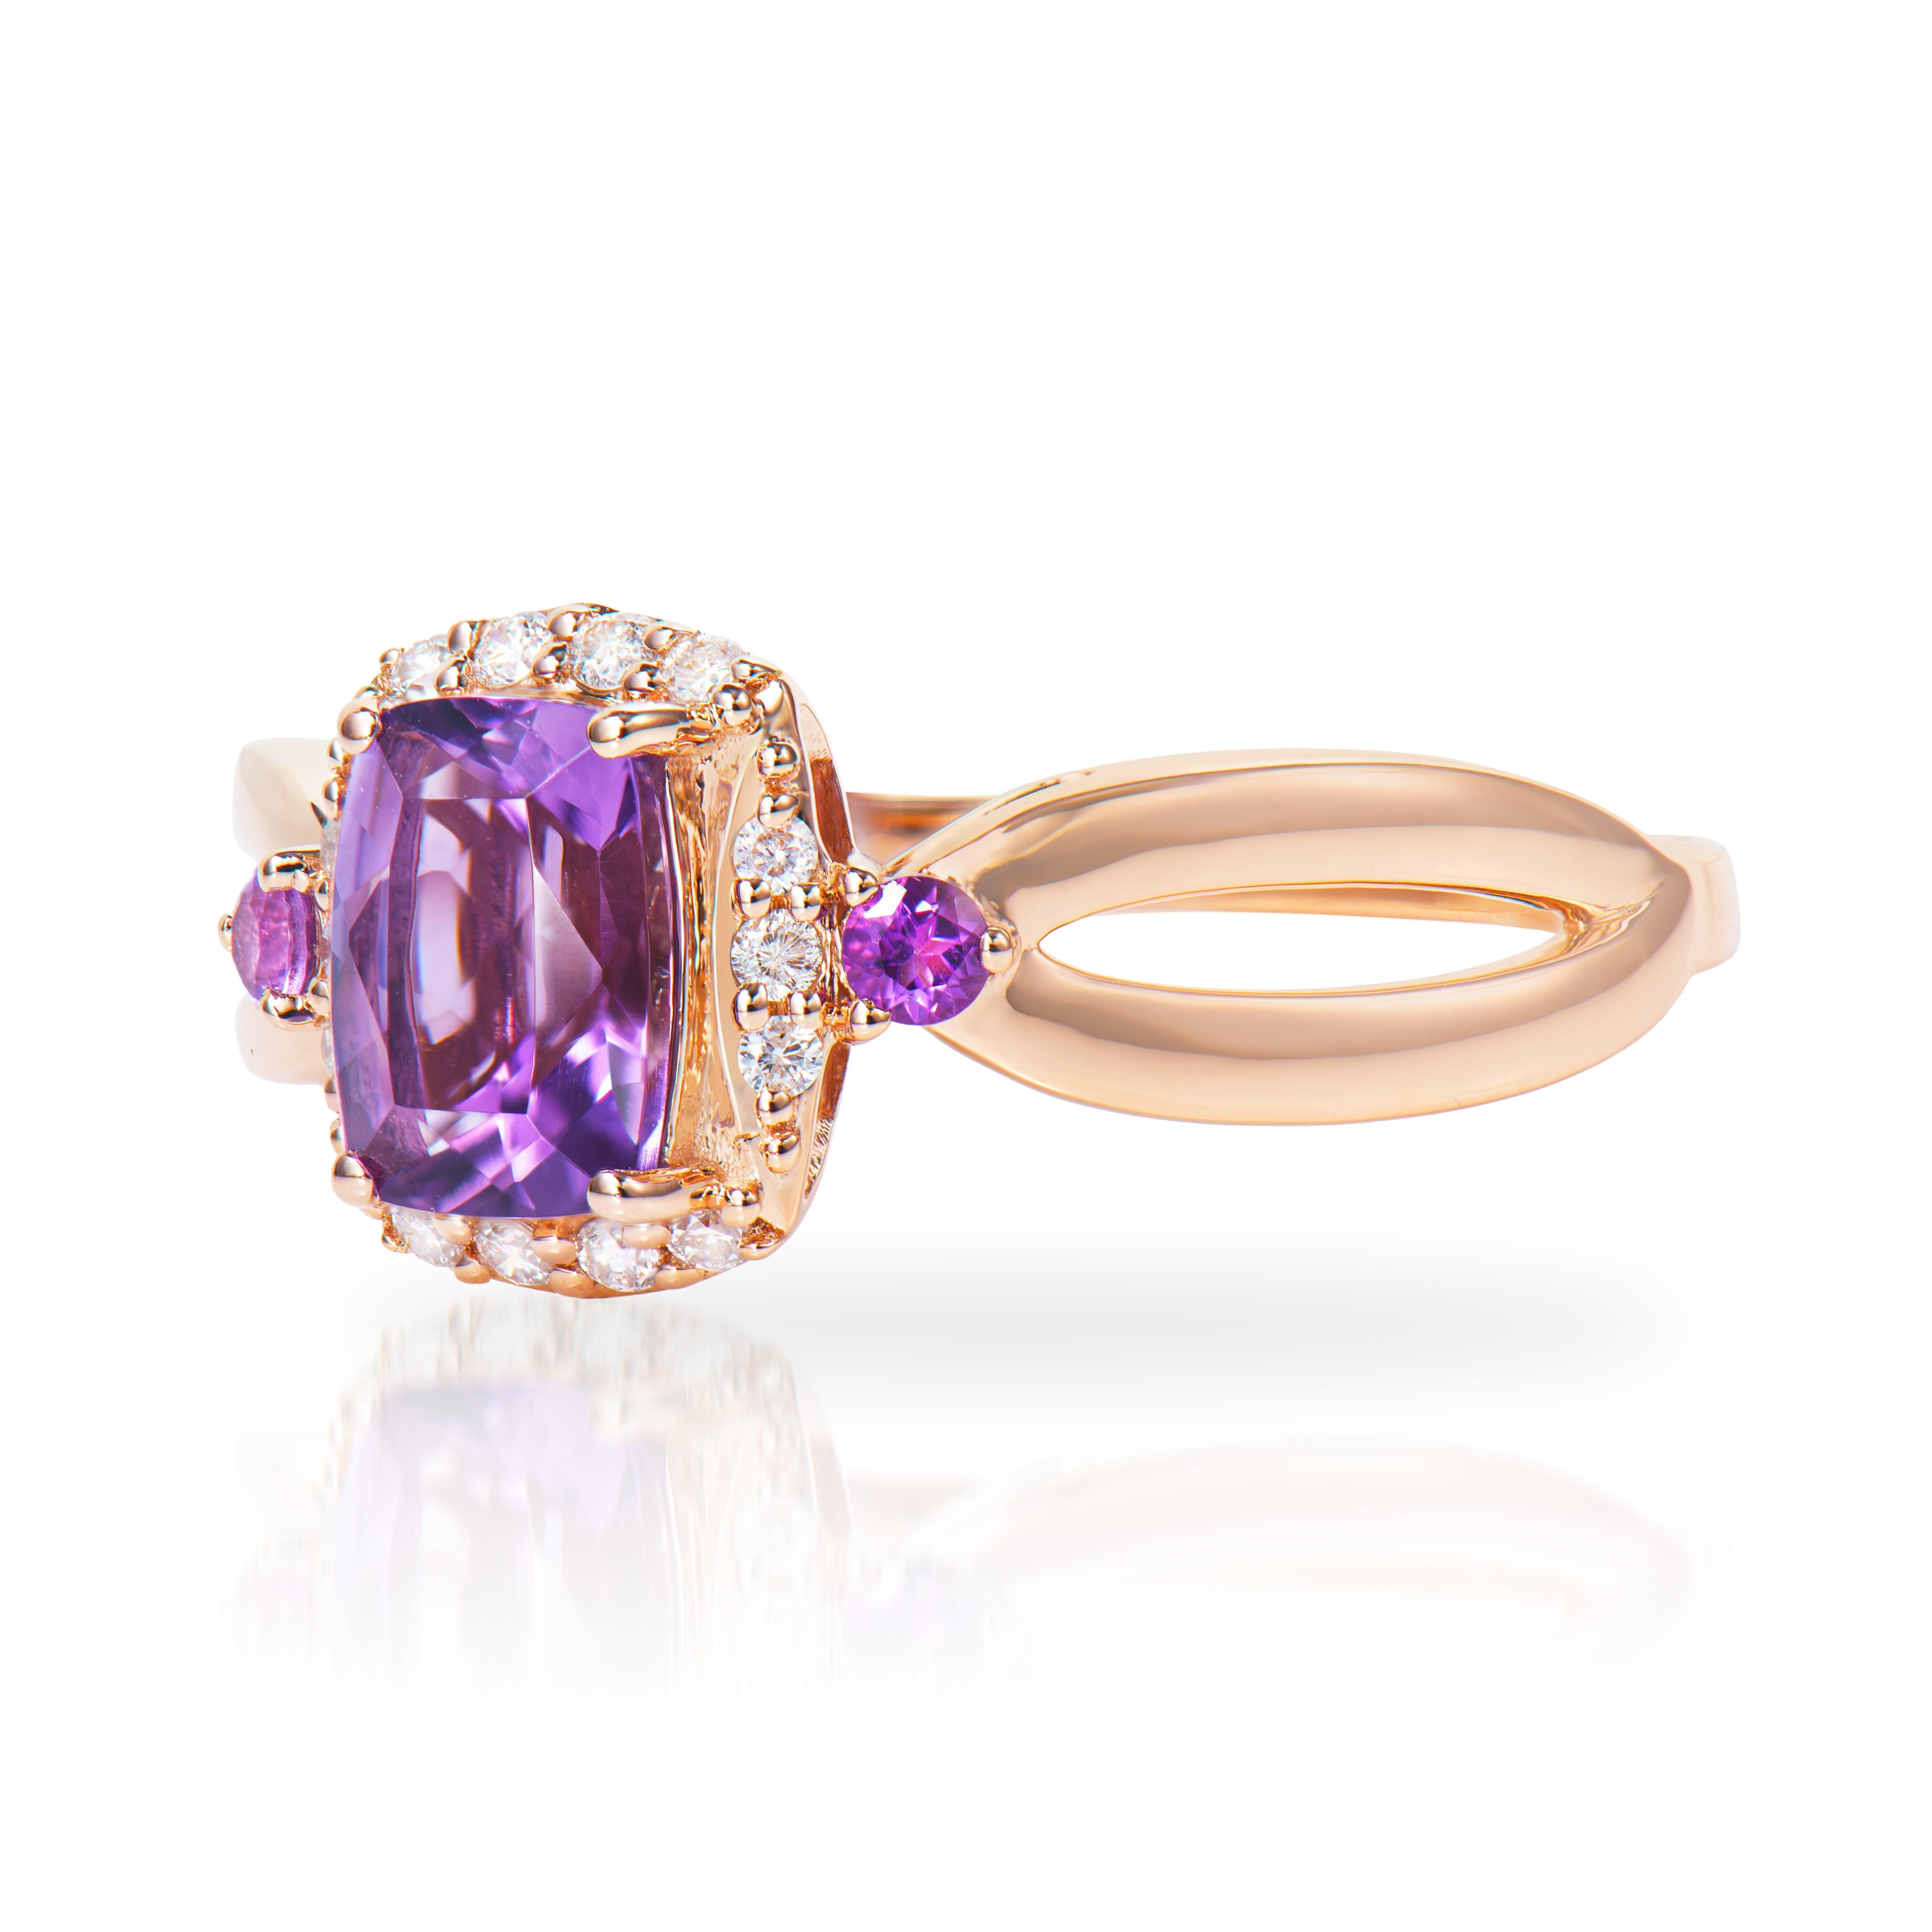 Cushion Cut 0.84 Carat Amethyst Fancy Ring in 14Karat Rose Gold with White Diamond.   For Sale